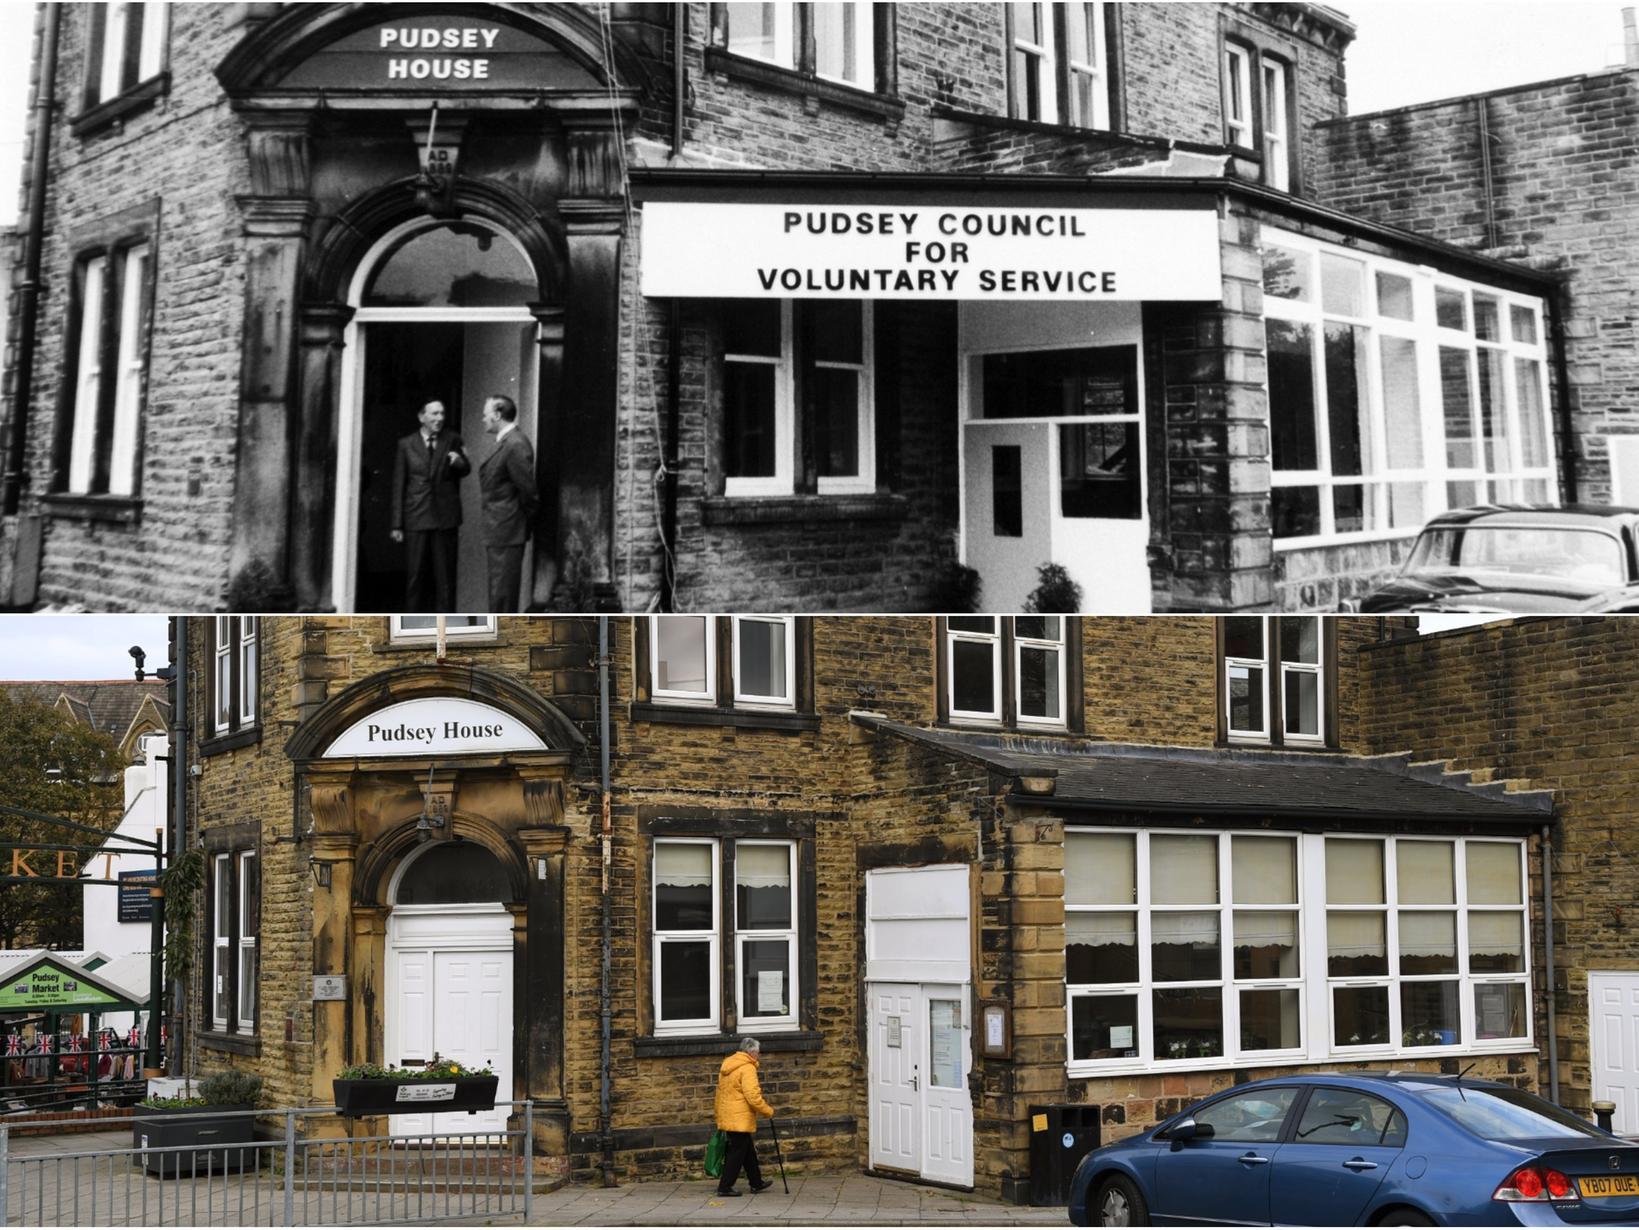 Pudsey House in 1976 and 2019.